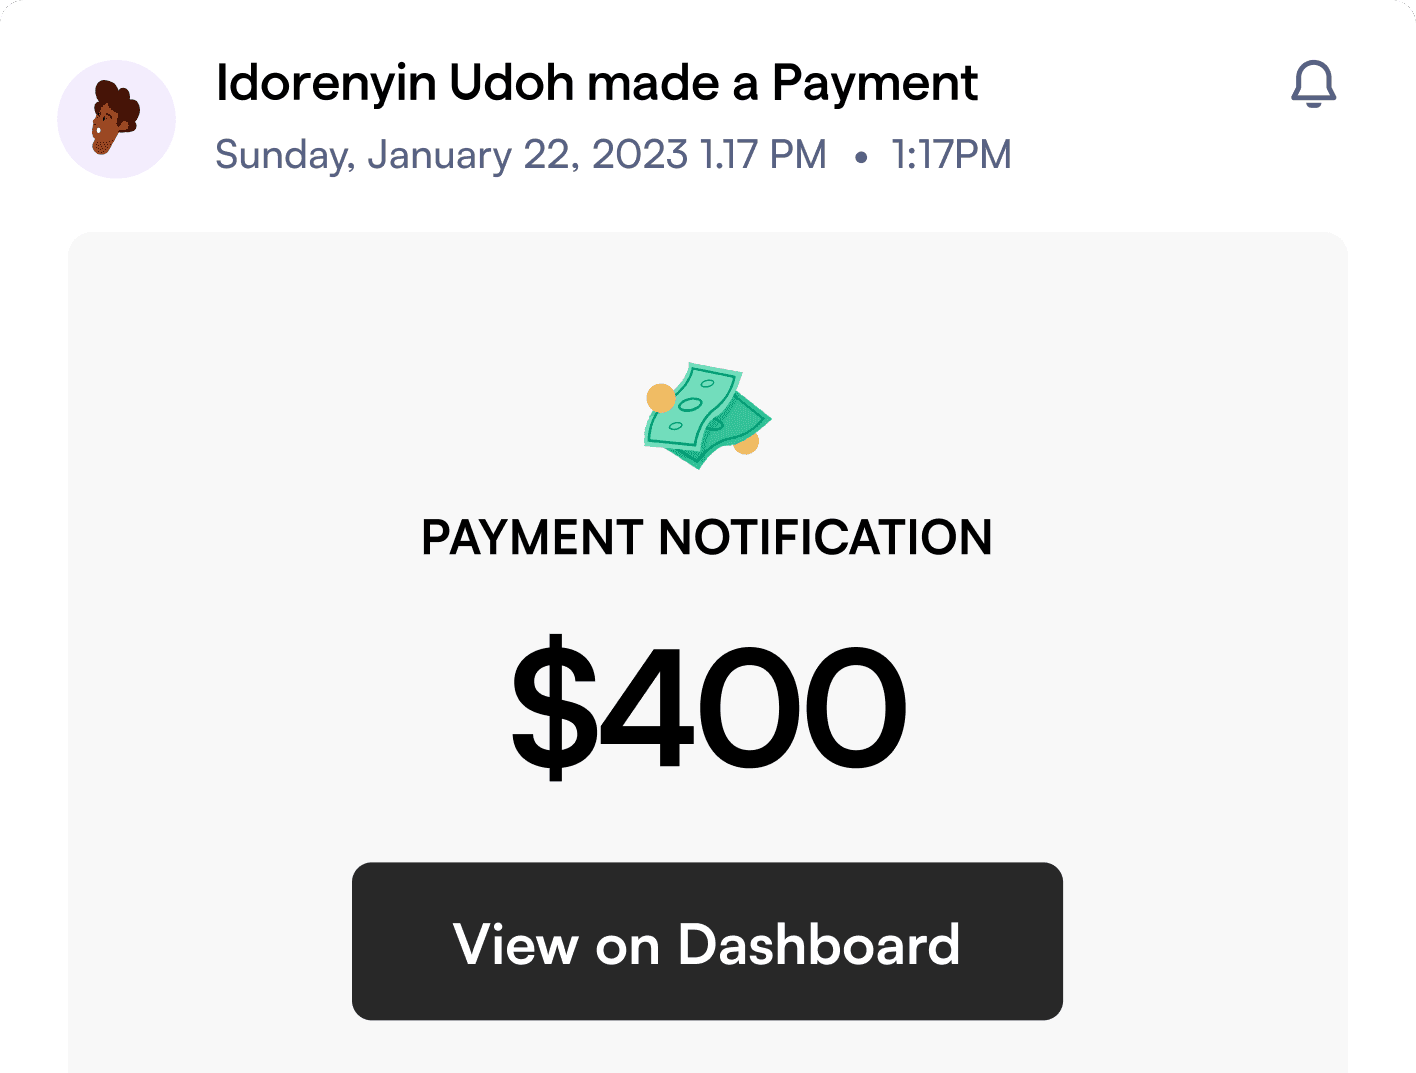 An image of payment notification